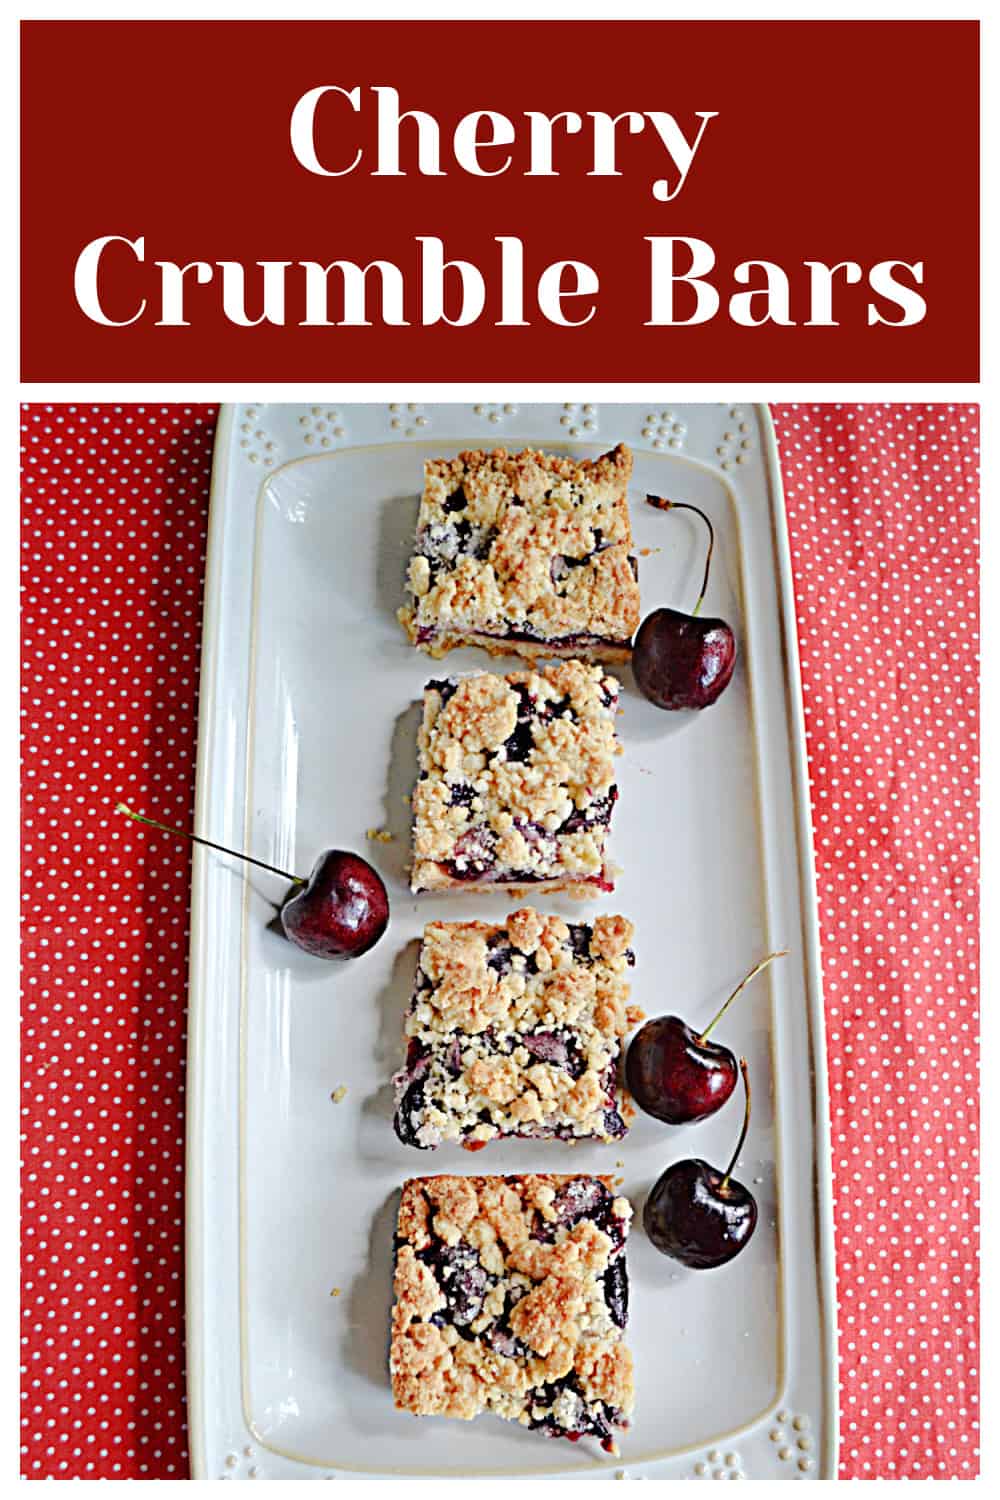 Pin Image: Text title, a platter with four cherry crumble bars on it.